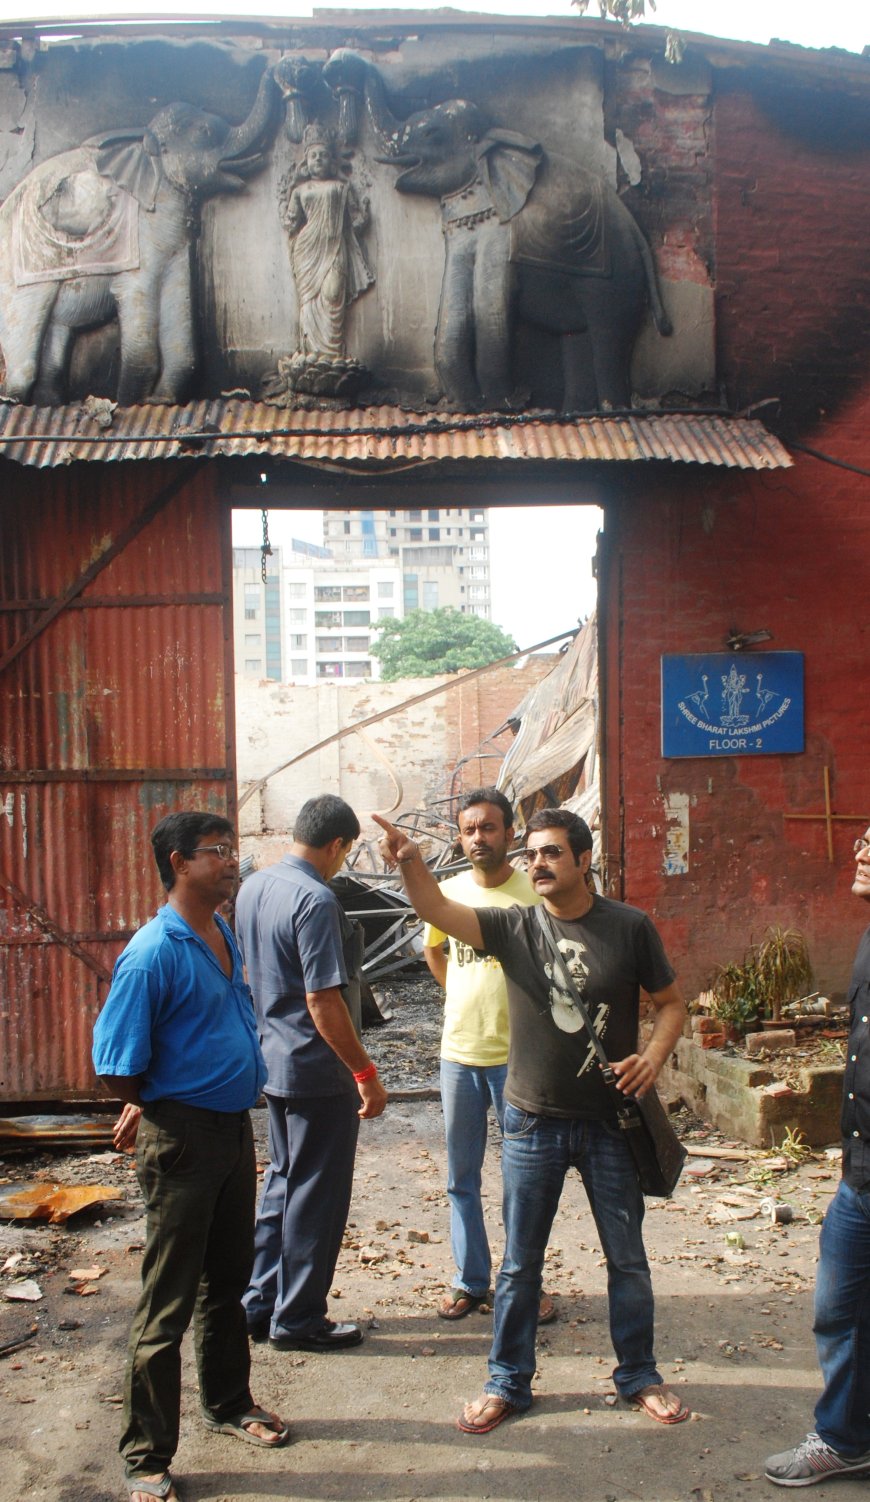 REPORT: HOW SAFE ARE FILM STUDIOS IN KOLKATA? LOOKING BACK ON THE FIRE IN 2011